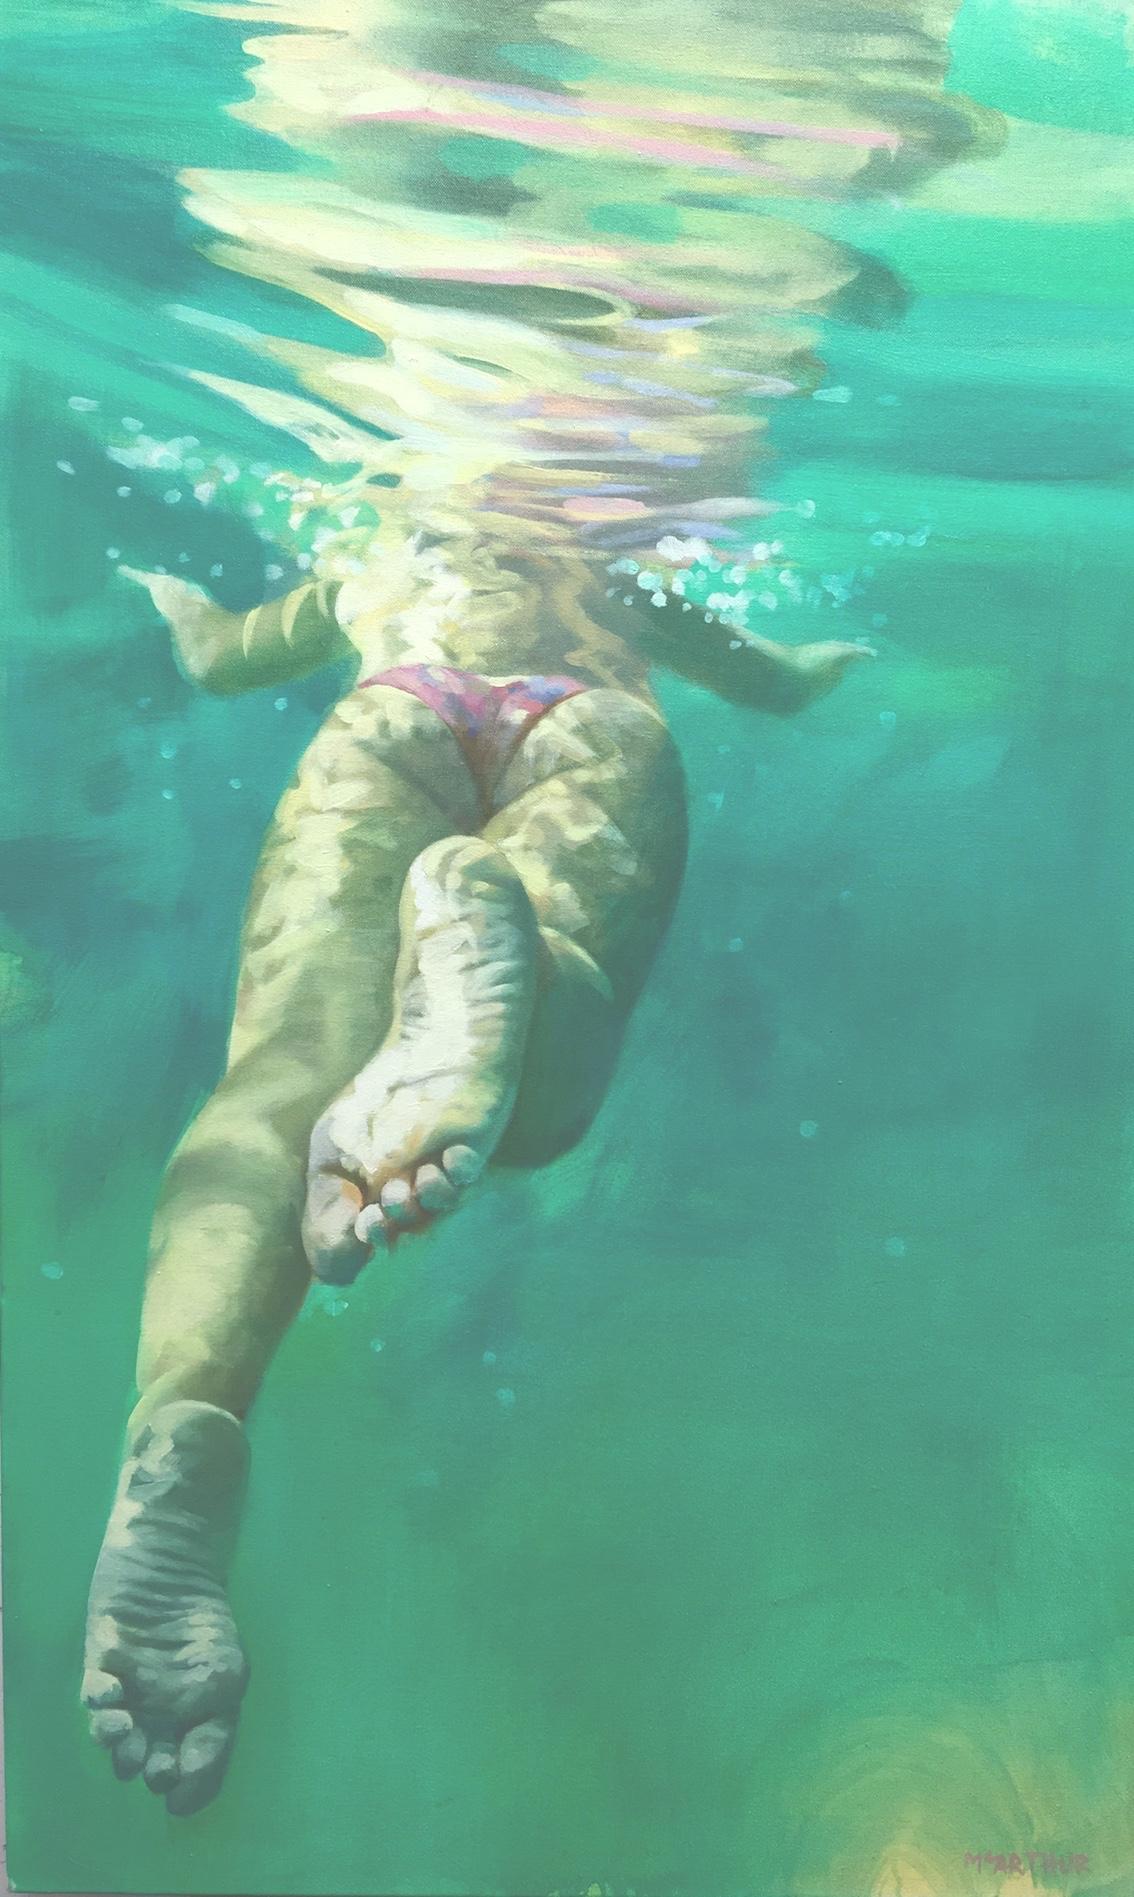 "Lift Off", Underwater female swimmer and soothing green water, Oil on canvas